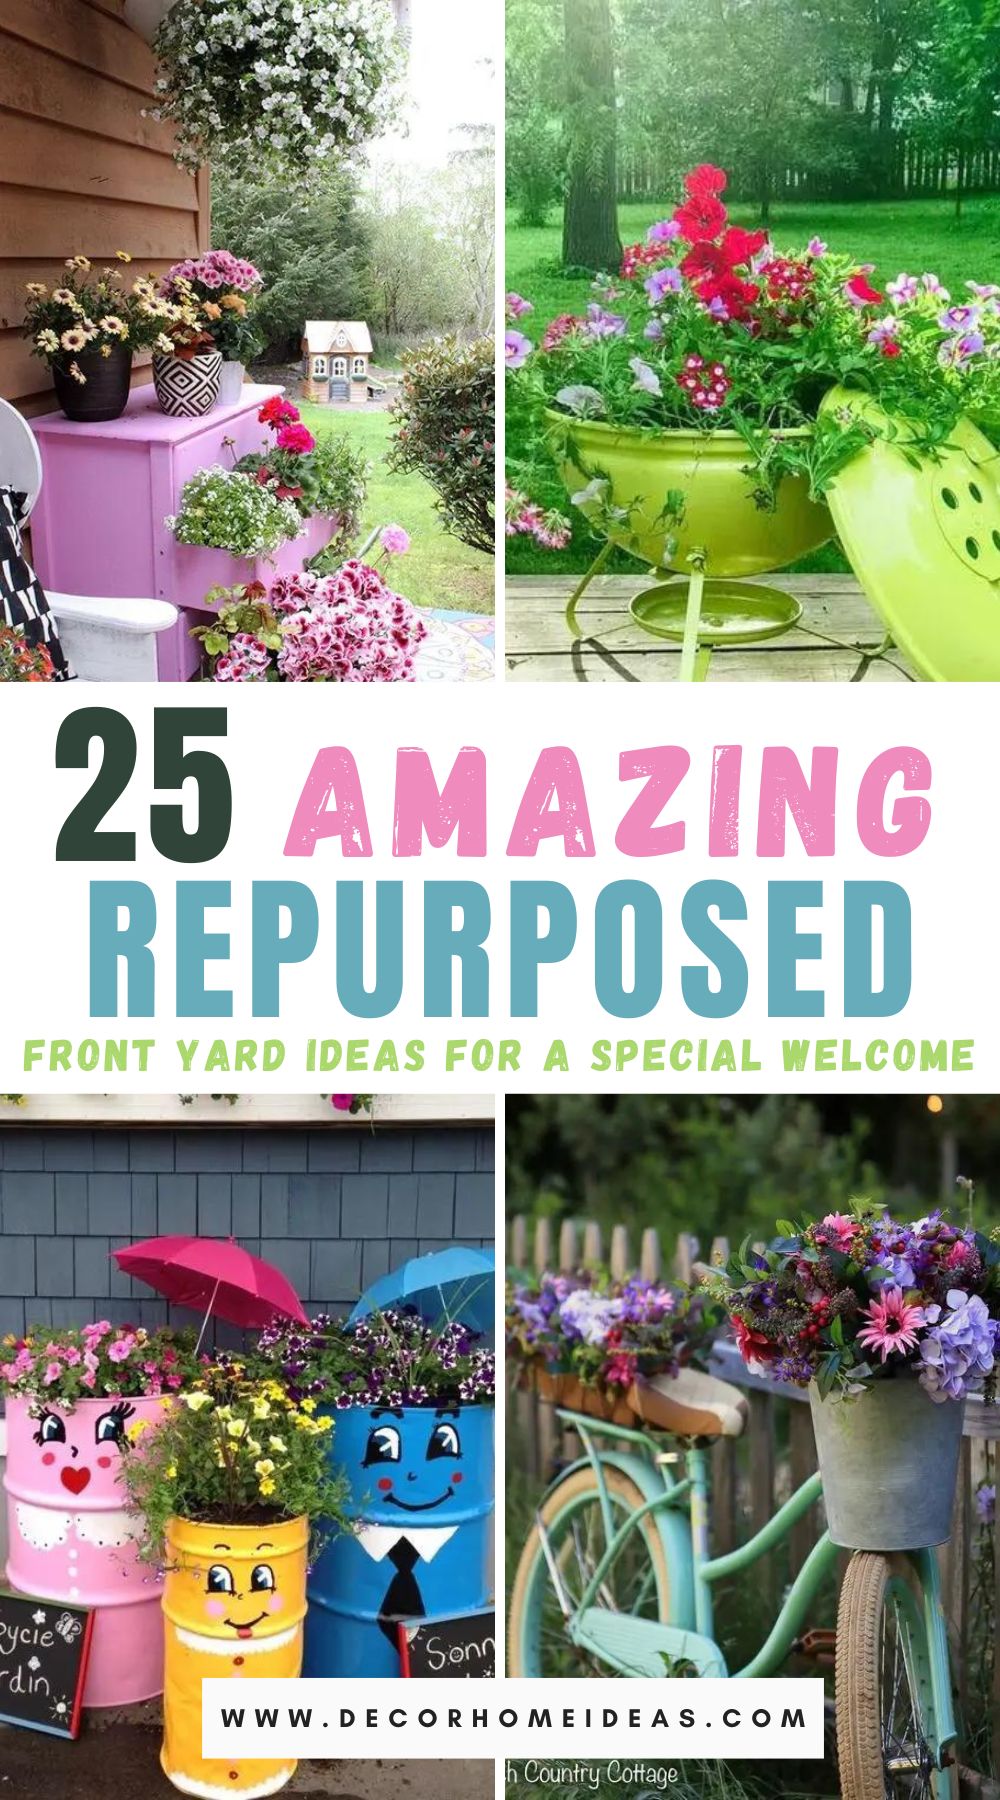 Transform your front yard with 25 creative and repurposed decorating ideas! Refresh your outdoor space with these unique and budget-friendly ideas.